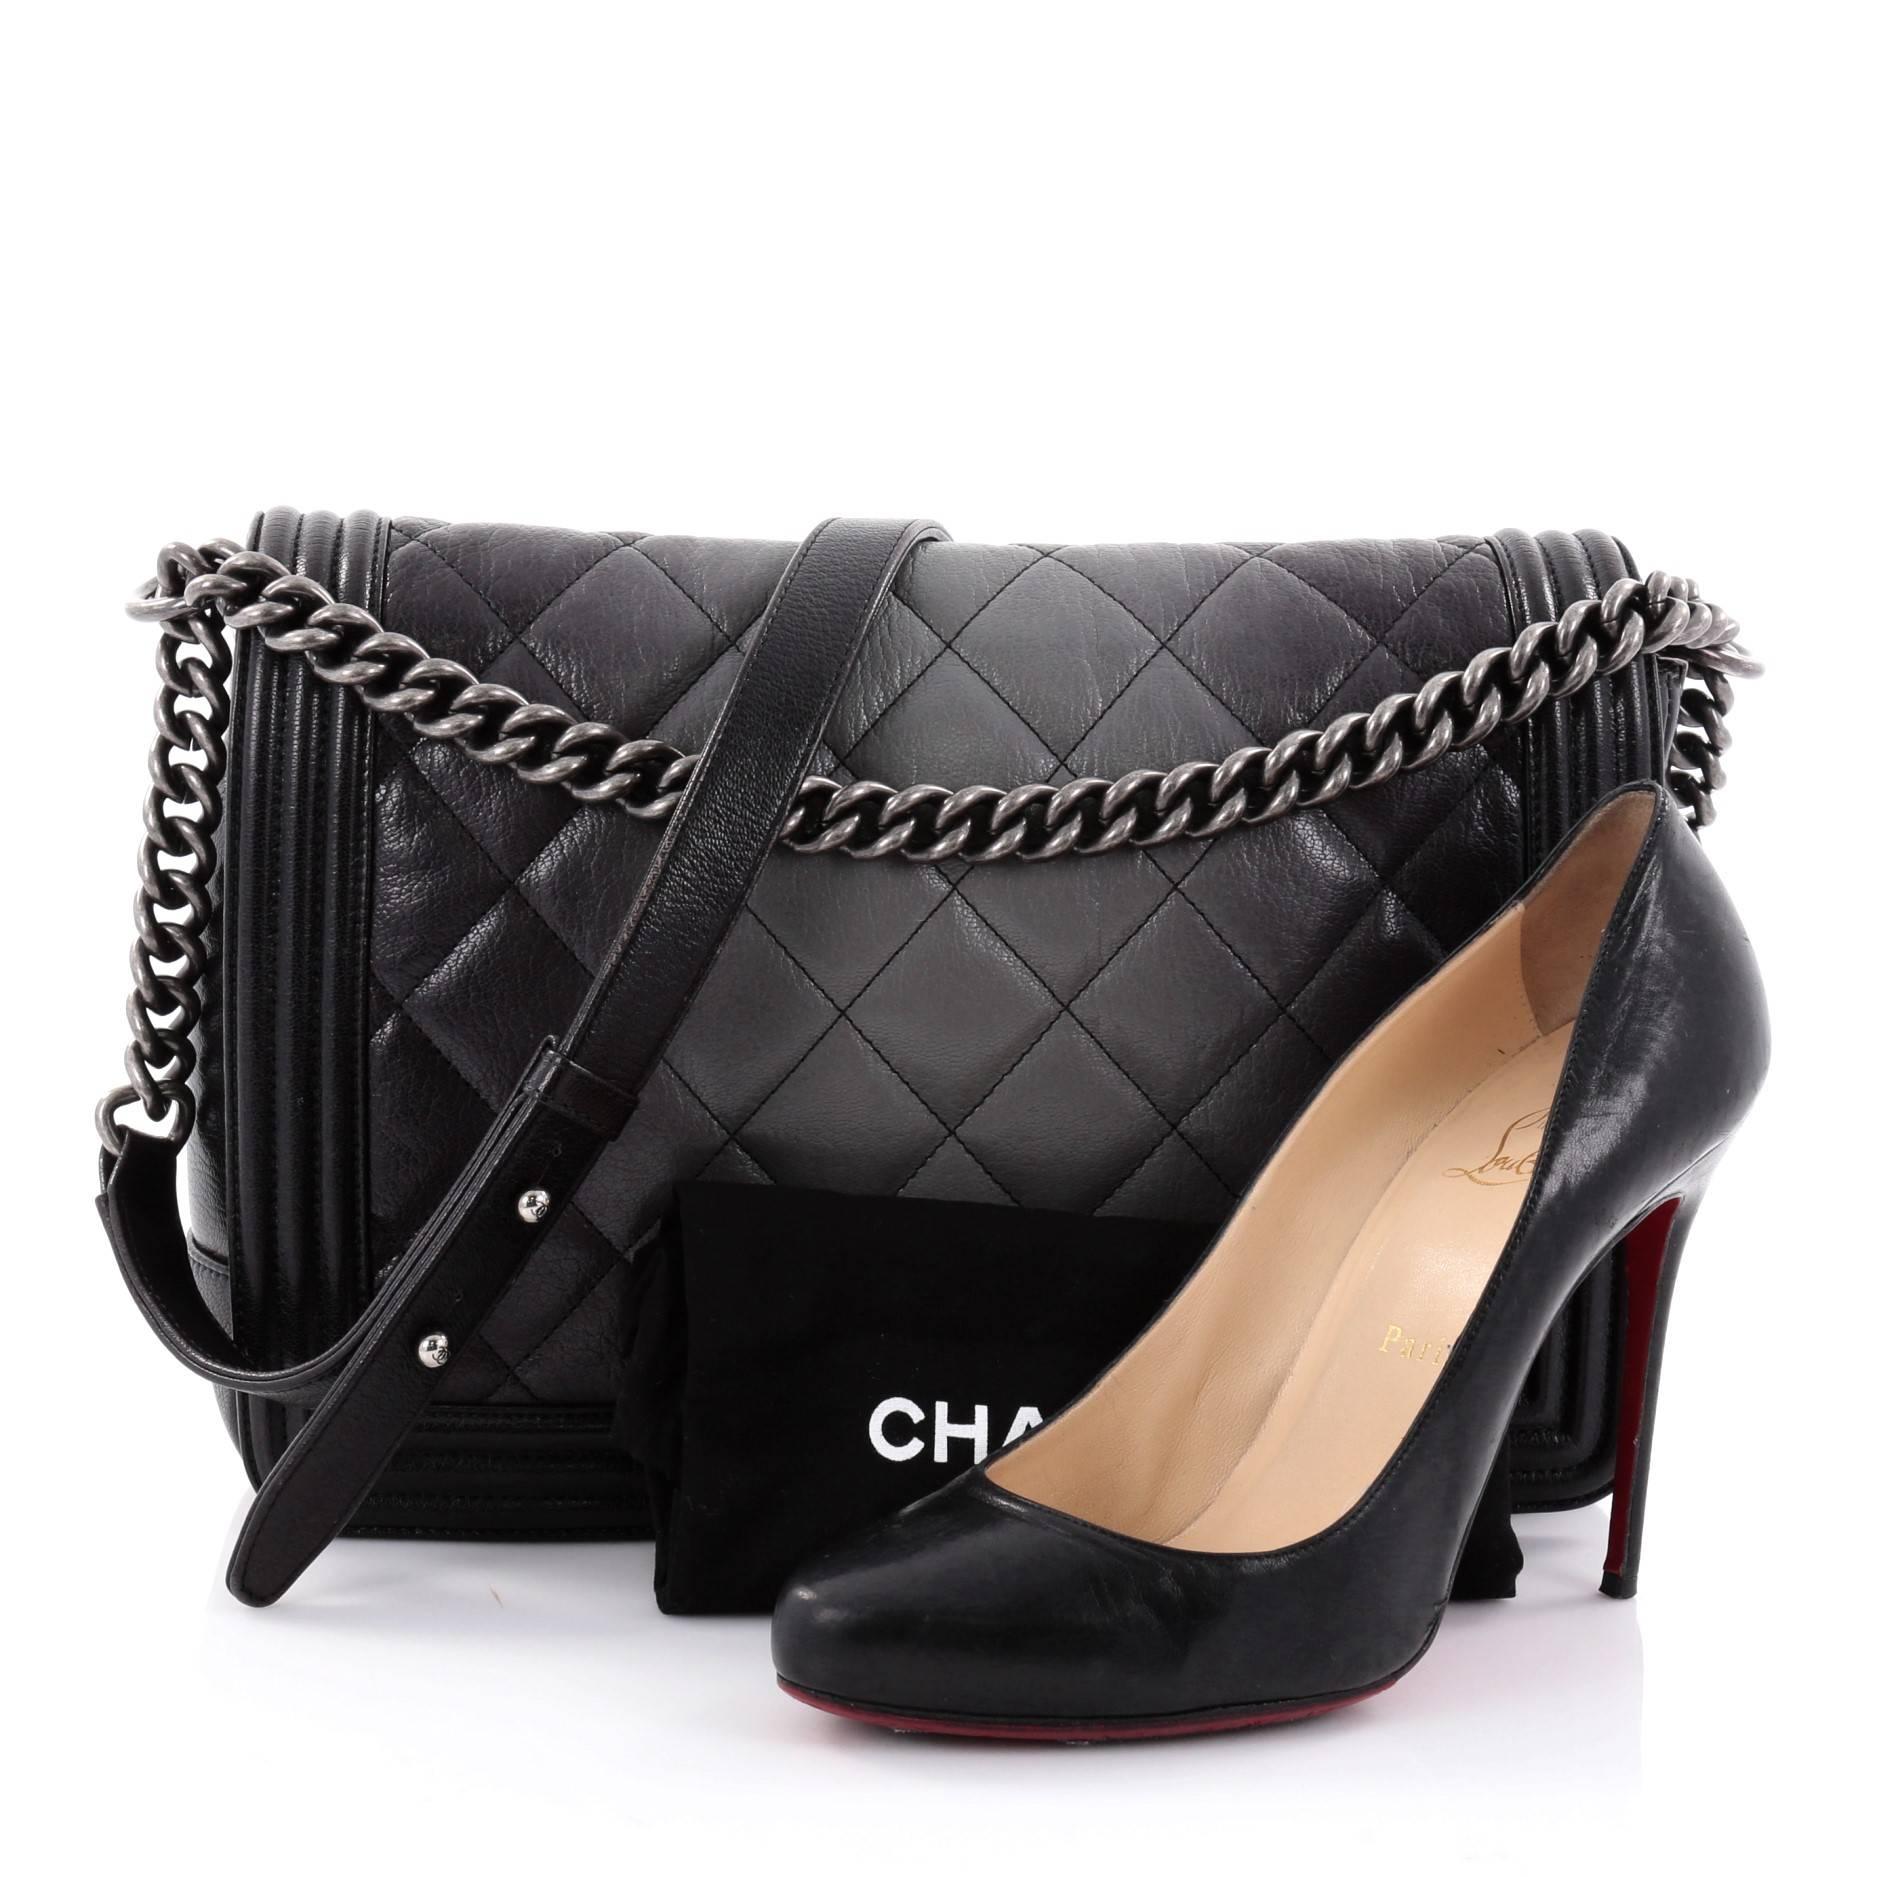 This authentic Chanel Boy Flap Bag Quilted Ombre Goatskin Large is every woman's dream. Crafted from luxurious black and gray quilted ombre goatskin, this popular enviable Boy flap bag features a chunky chain link strap with leather shoulder pad,